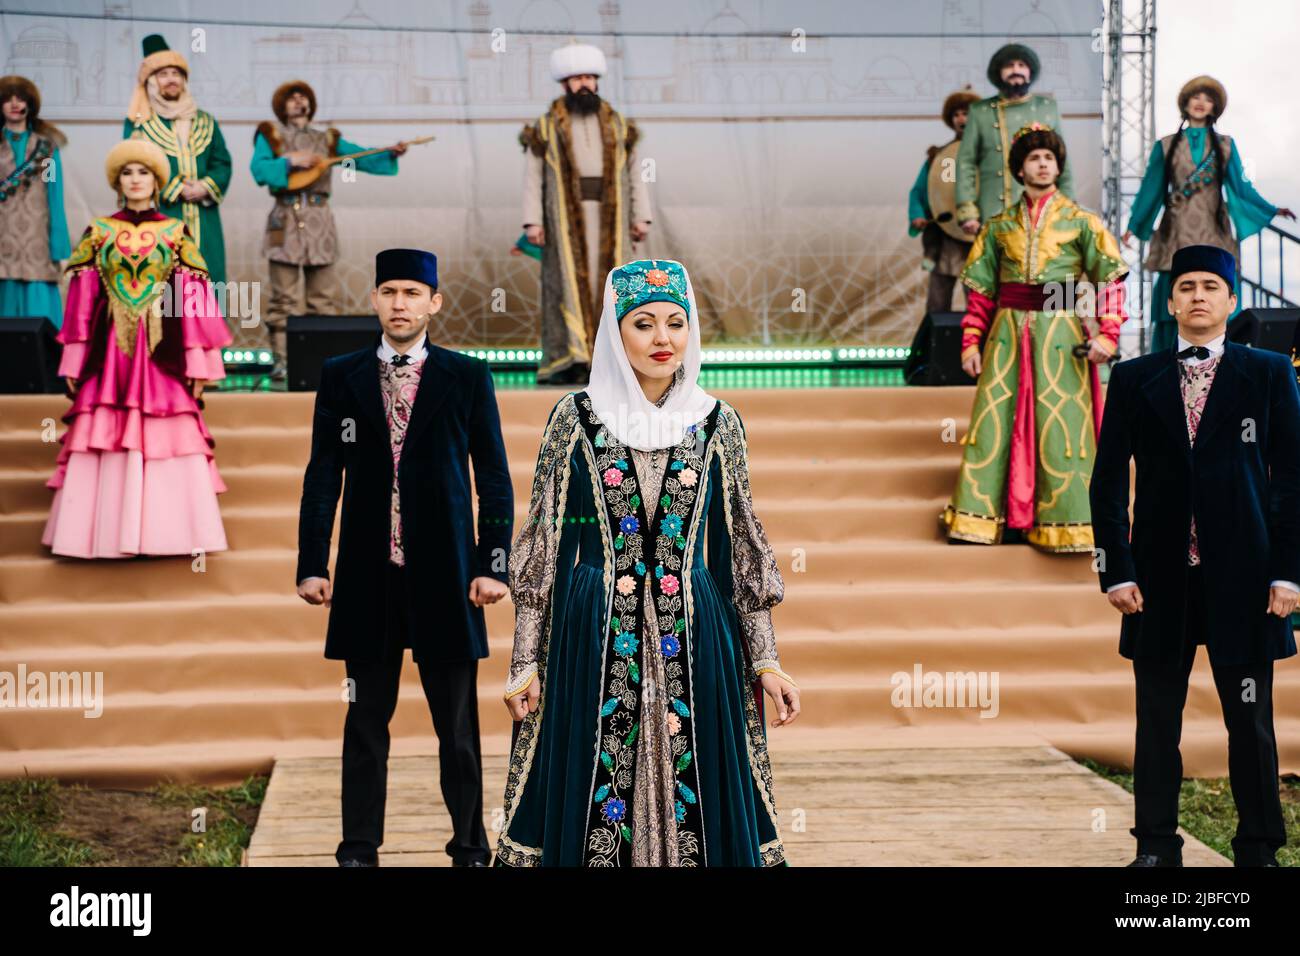 Bolgar, Tatarstan, Russia. May 21, 2022. Tatar National Ensemble dances and sings at the Folklore Festival. Tatars in national costumes. Ethnics and traditional arts concept. Stock Photo